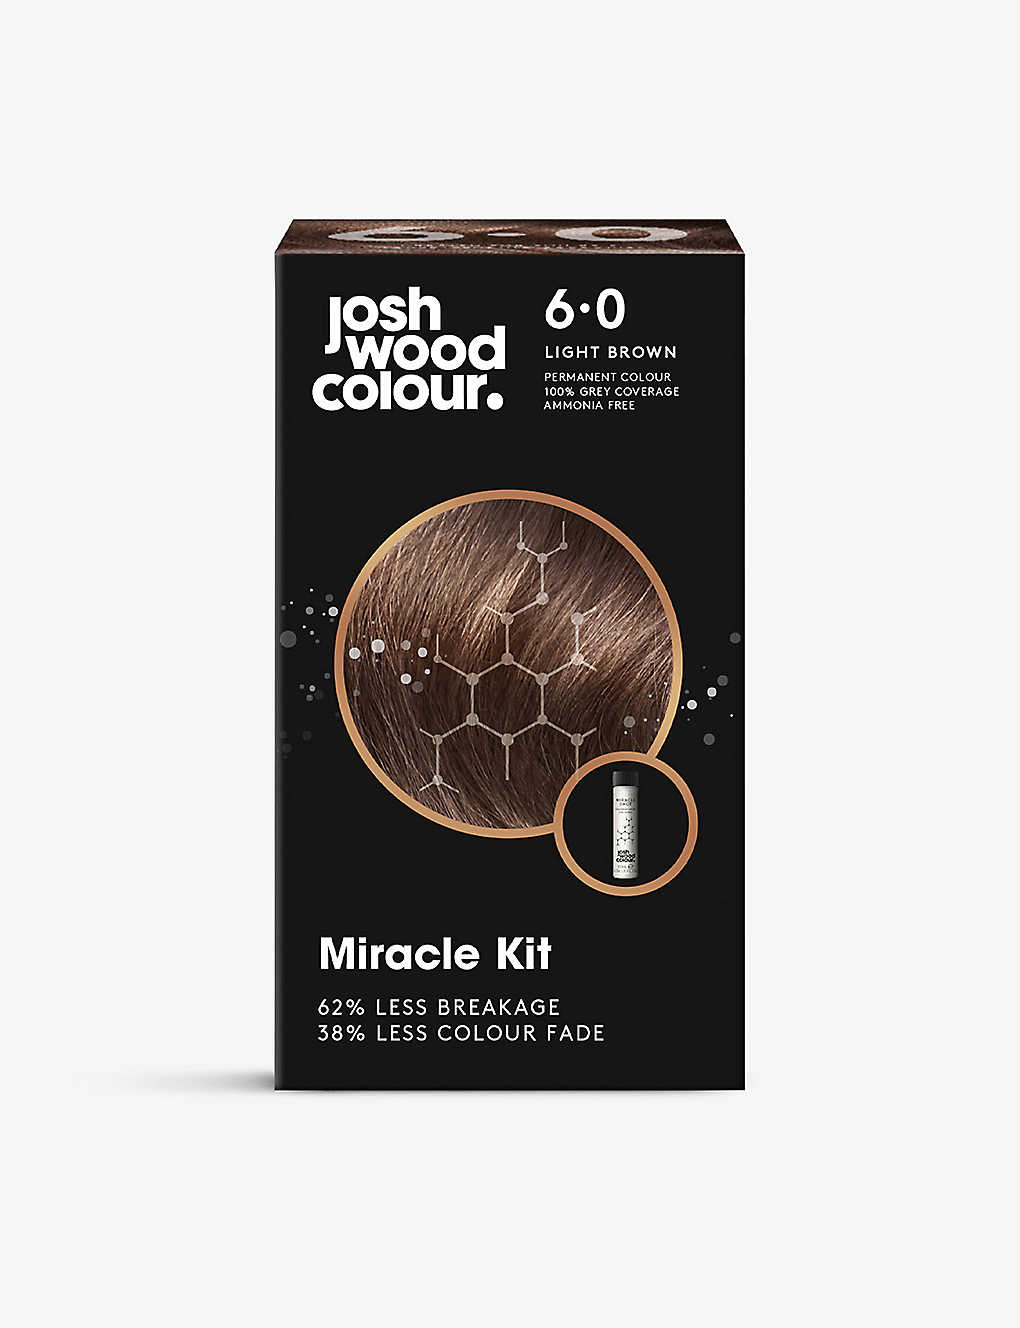 Josh Wood Colour Colour Miracle Kit Permanent Hair Dye In 6.0 Light Brown